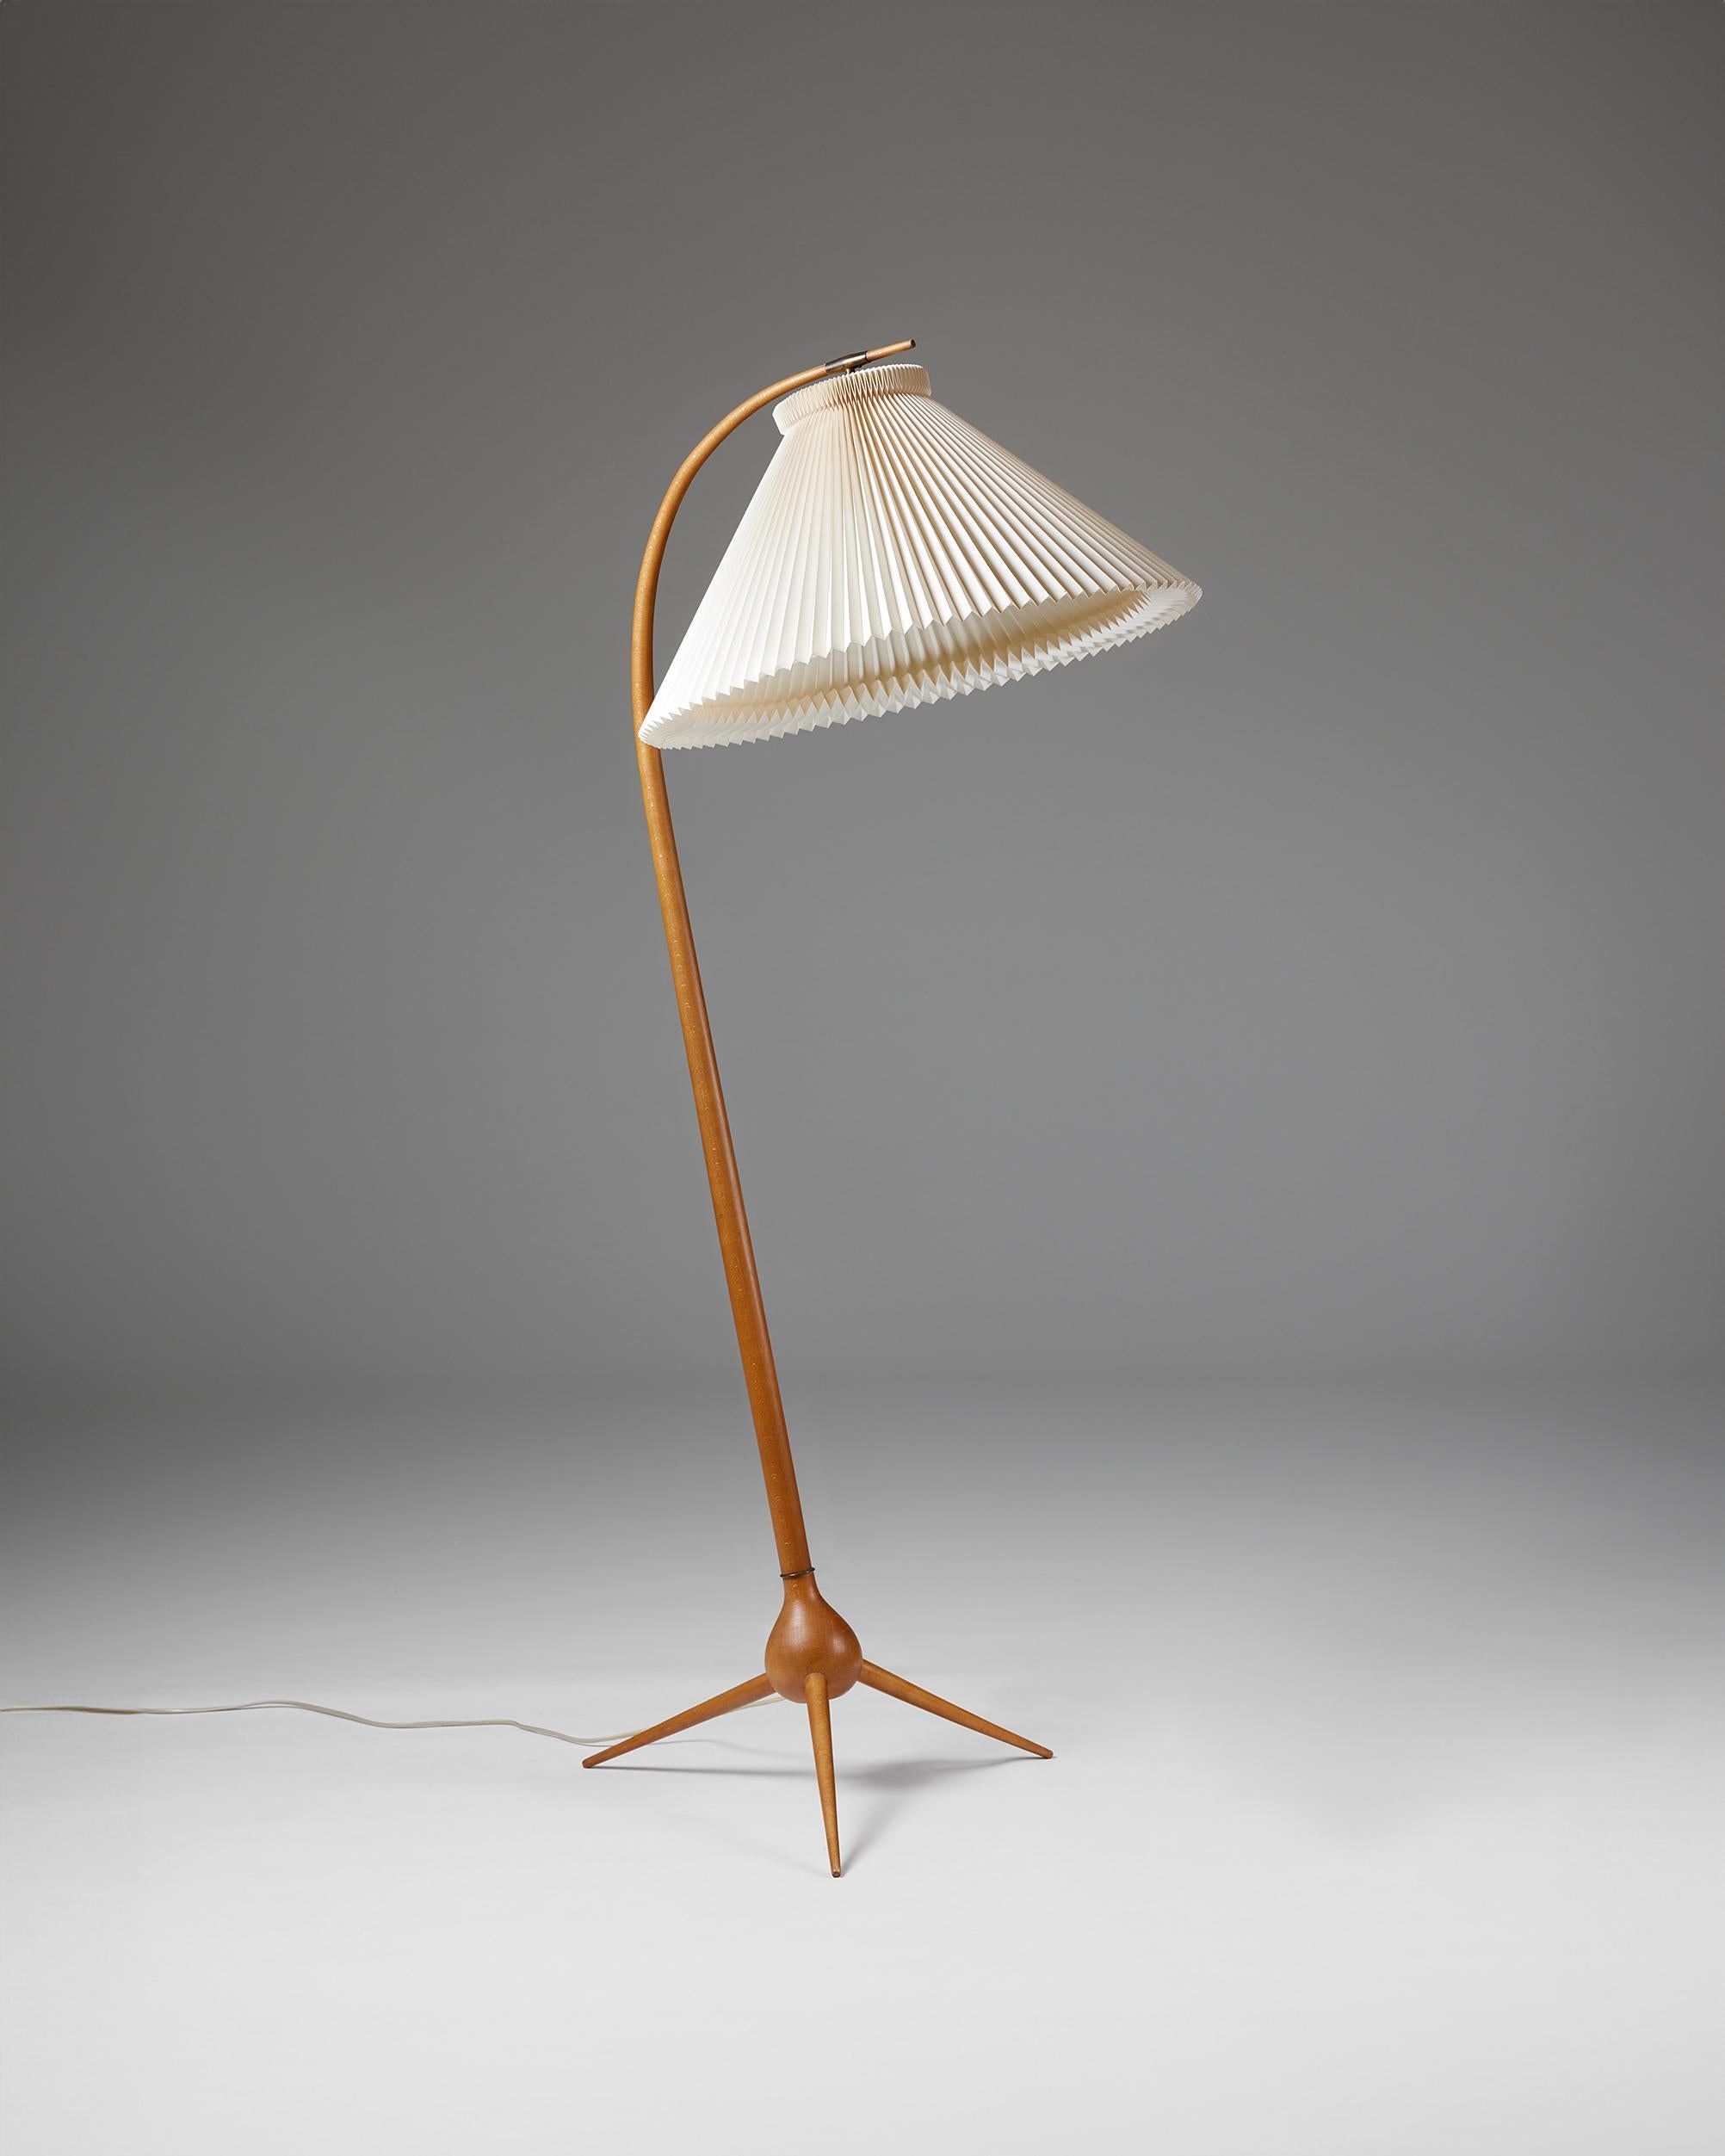 Floor lamp ‘Bridge’ designed by Severin Hansen Jr. for Haslev Möbler, Denmark, 1950s

Beech.

This Danish floor lamp ‘Bridge’ was designed by Severin Hansen in the 1950s. The white shade elegantly hangs from a curved beech stem that balances on